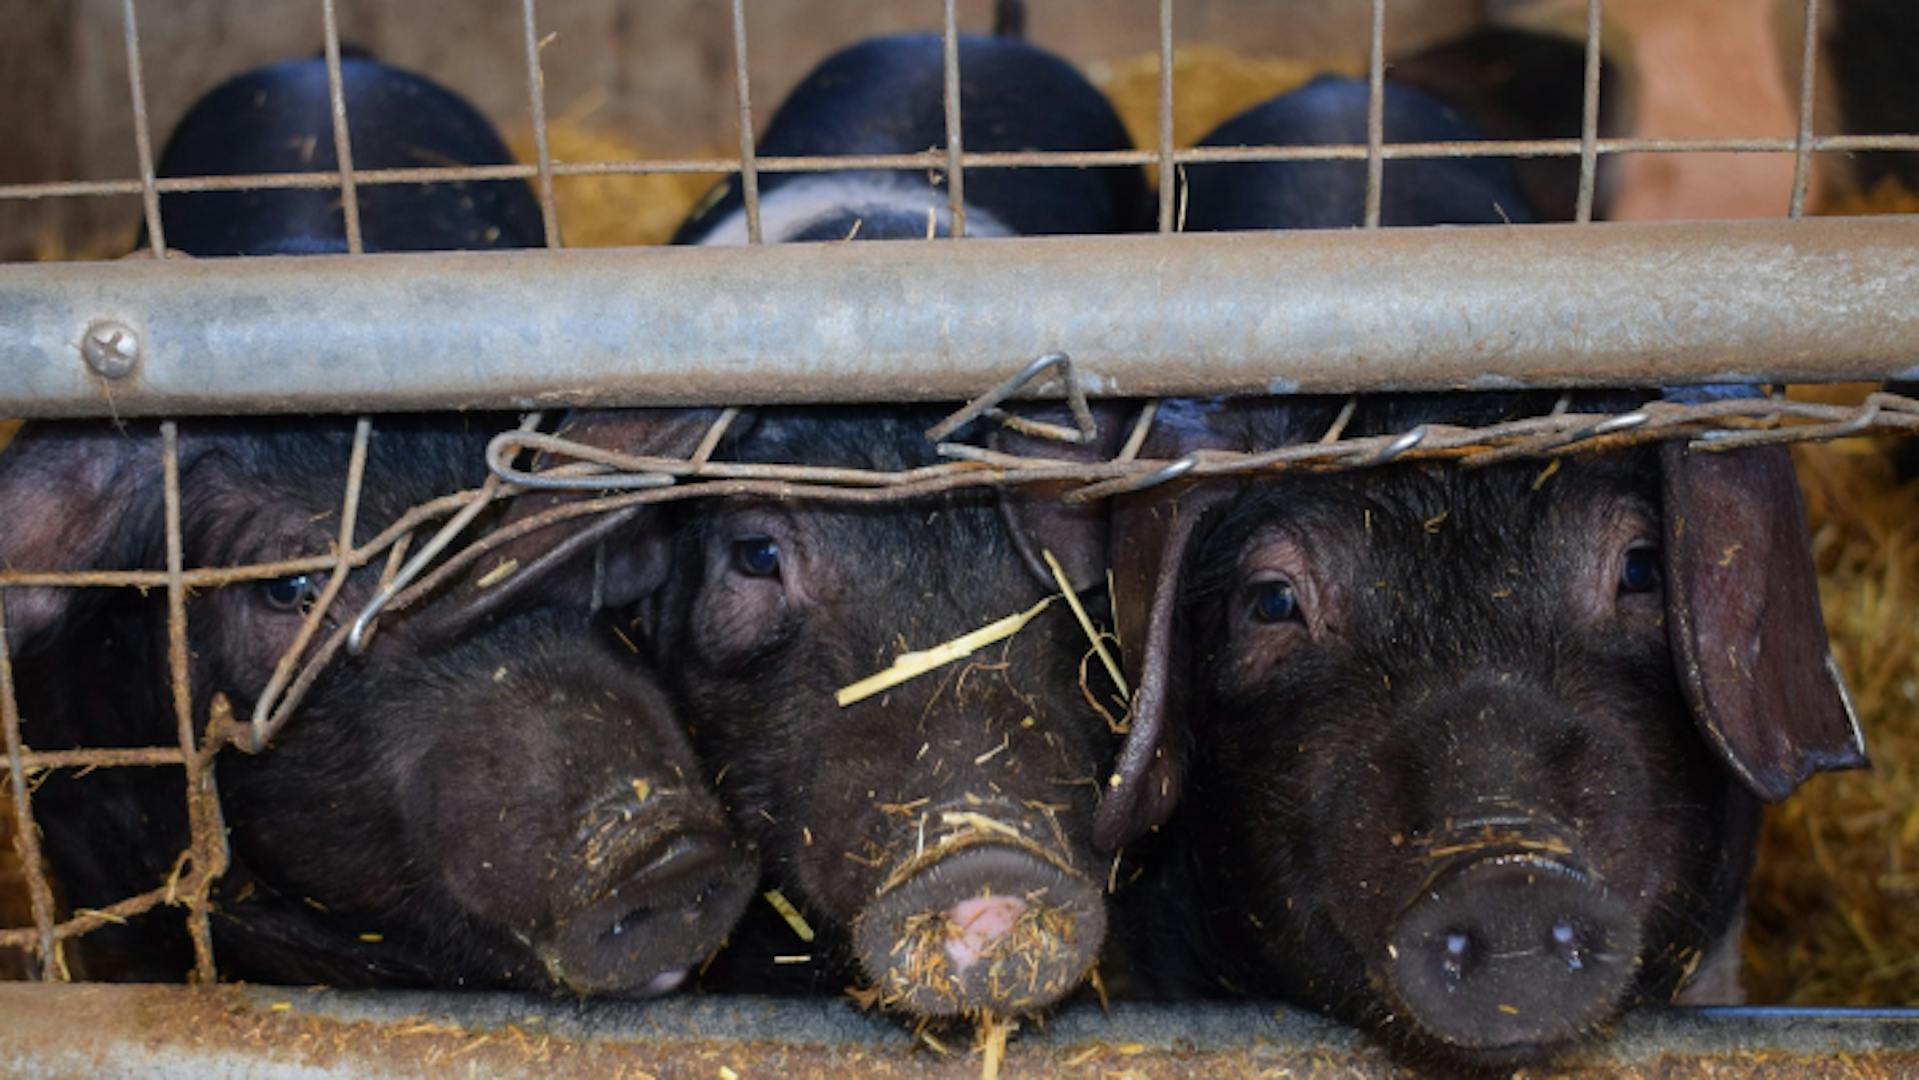 Pigs peek out from under a fence